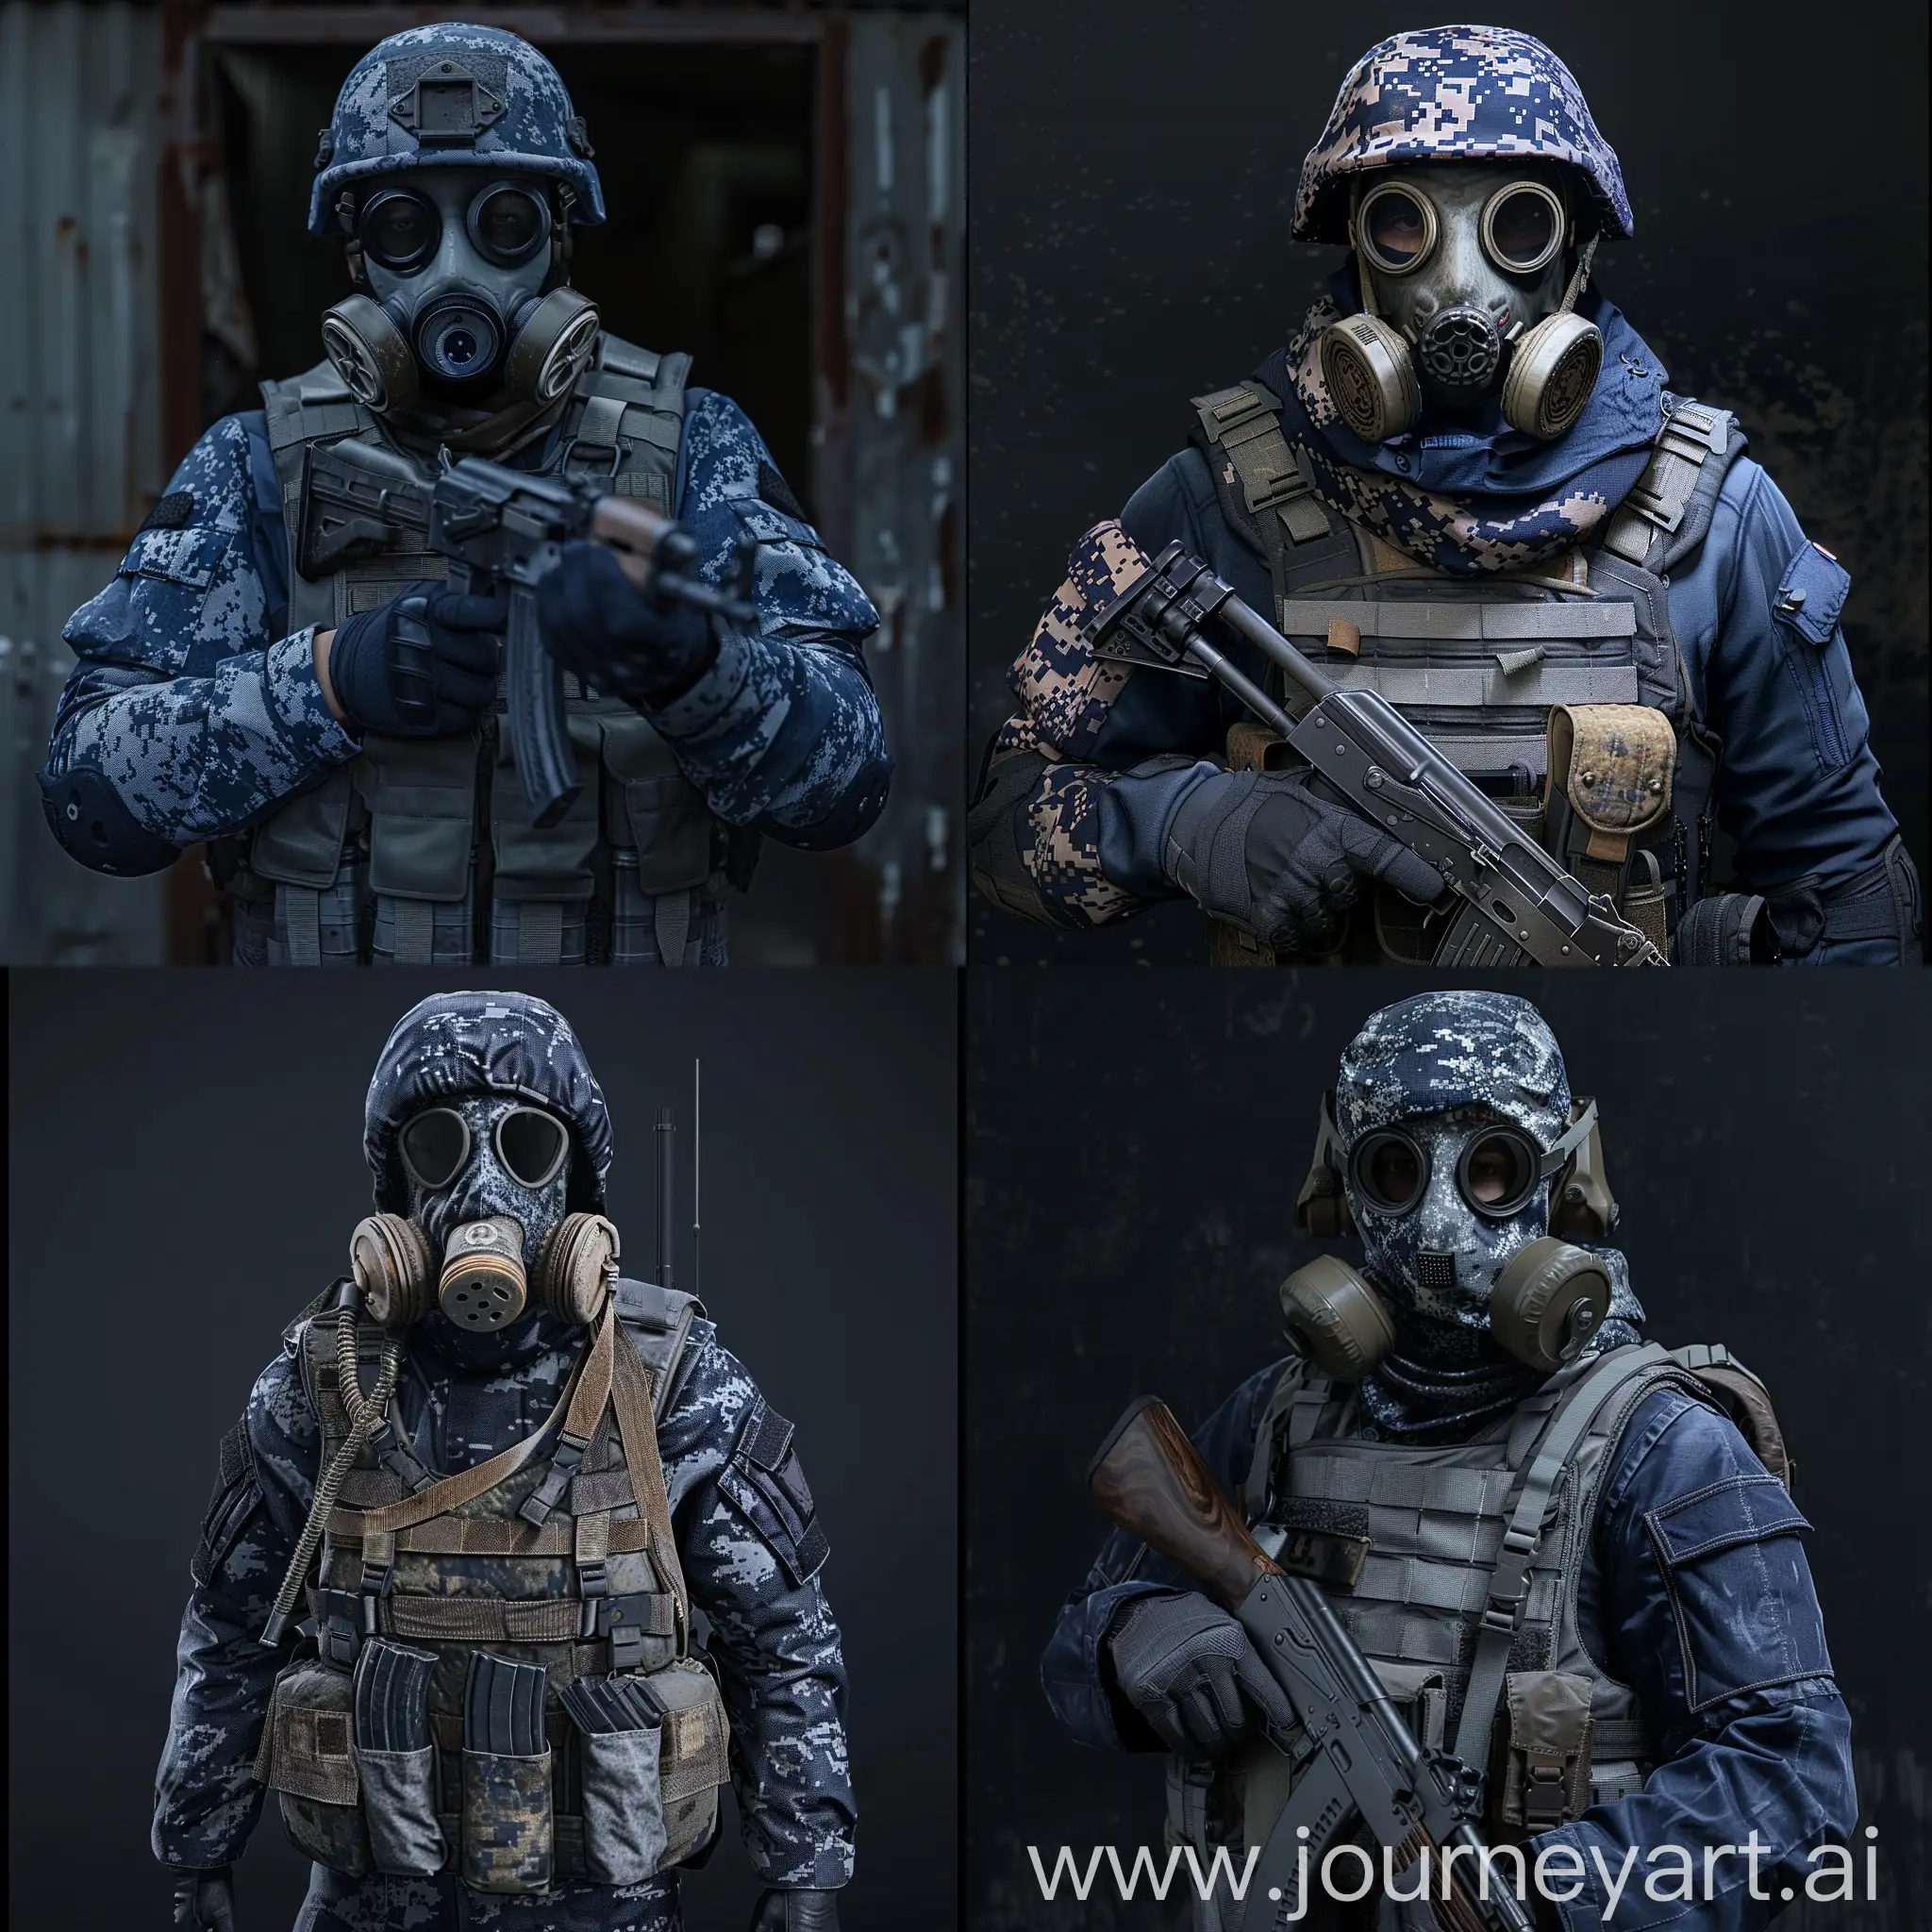 Mercenaries from the game stalker if the game was in the 80s under the Soviet Union, Protection: camouflage uniform of the British model dark blue, dark gloves, gray bulletproof vest, US M40 gas mask, Weapon: American submachine gun from the time of Vietnam.